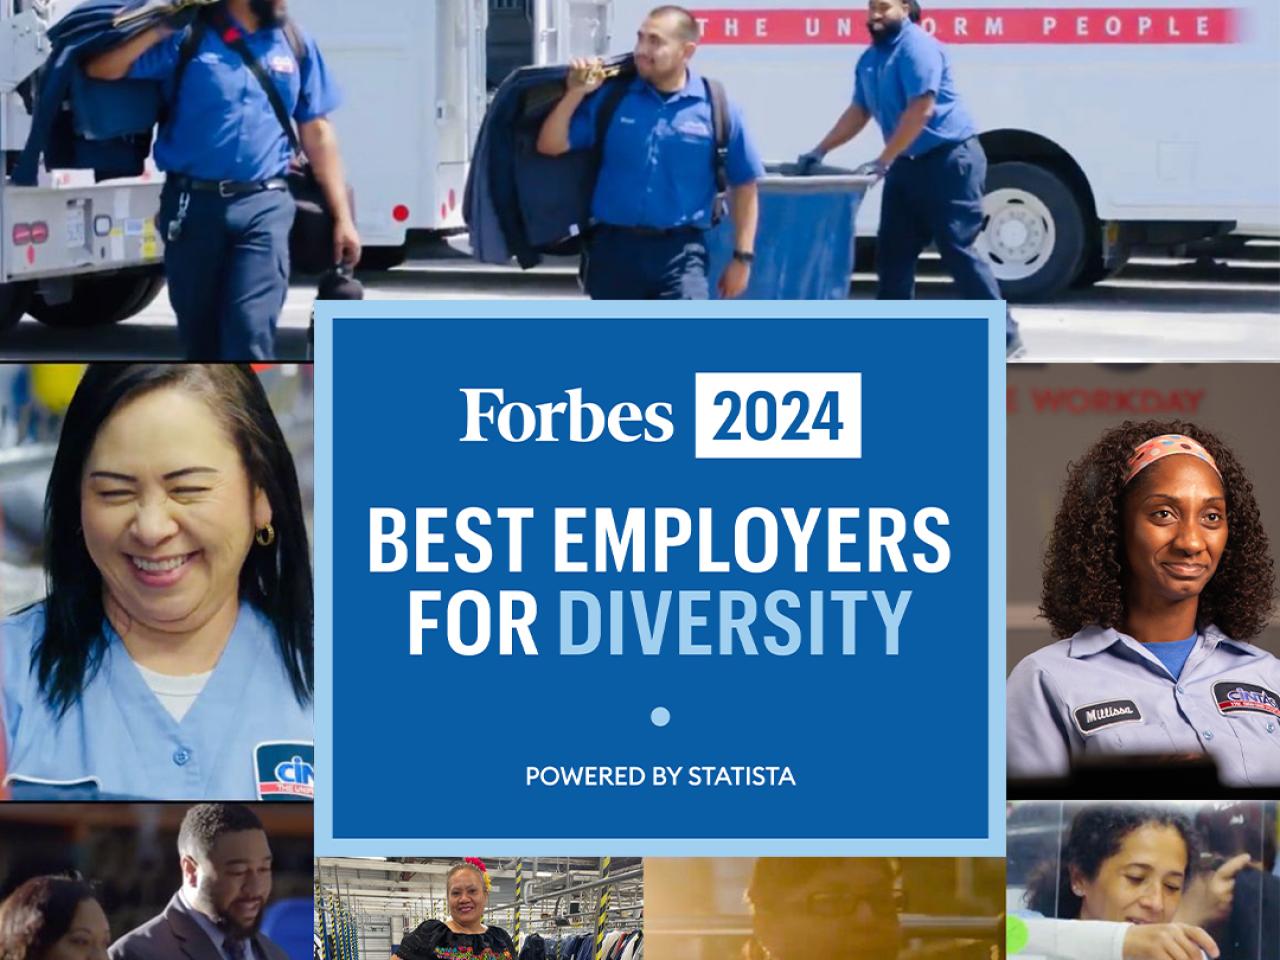 Forbes 2024 Best Employers for Diversity collage of Cintas employees